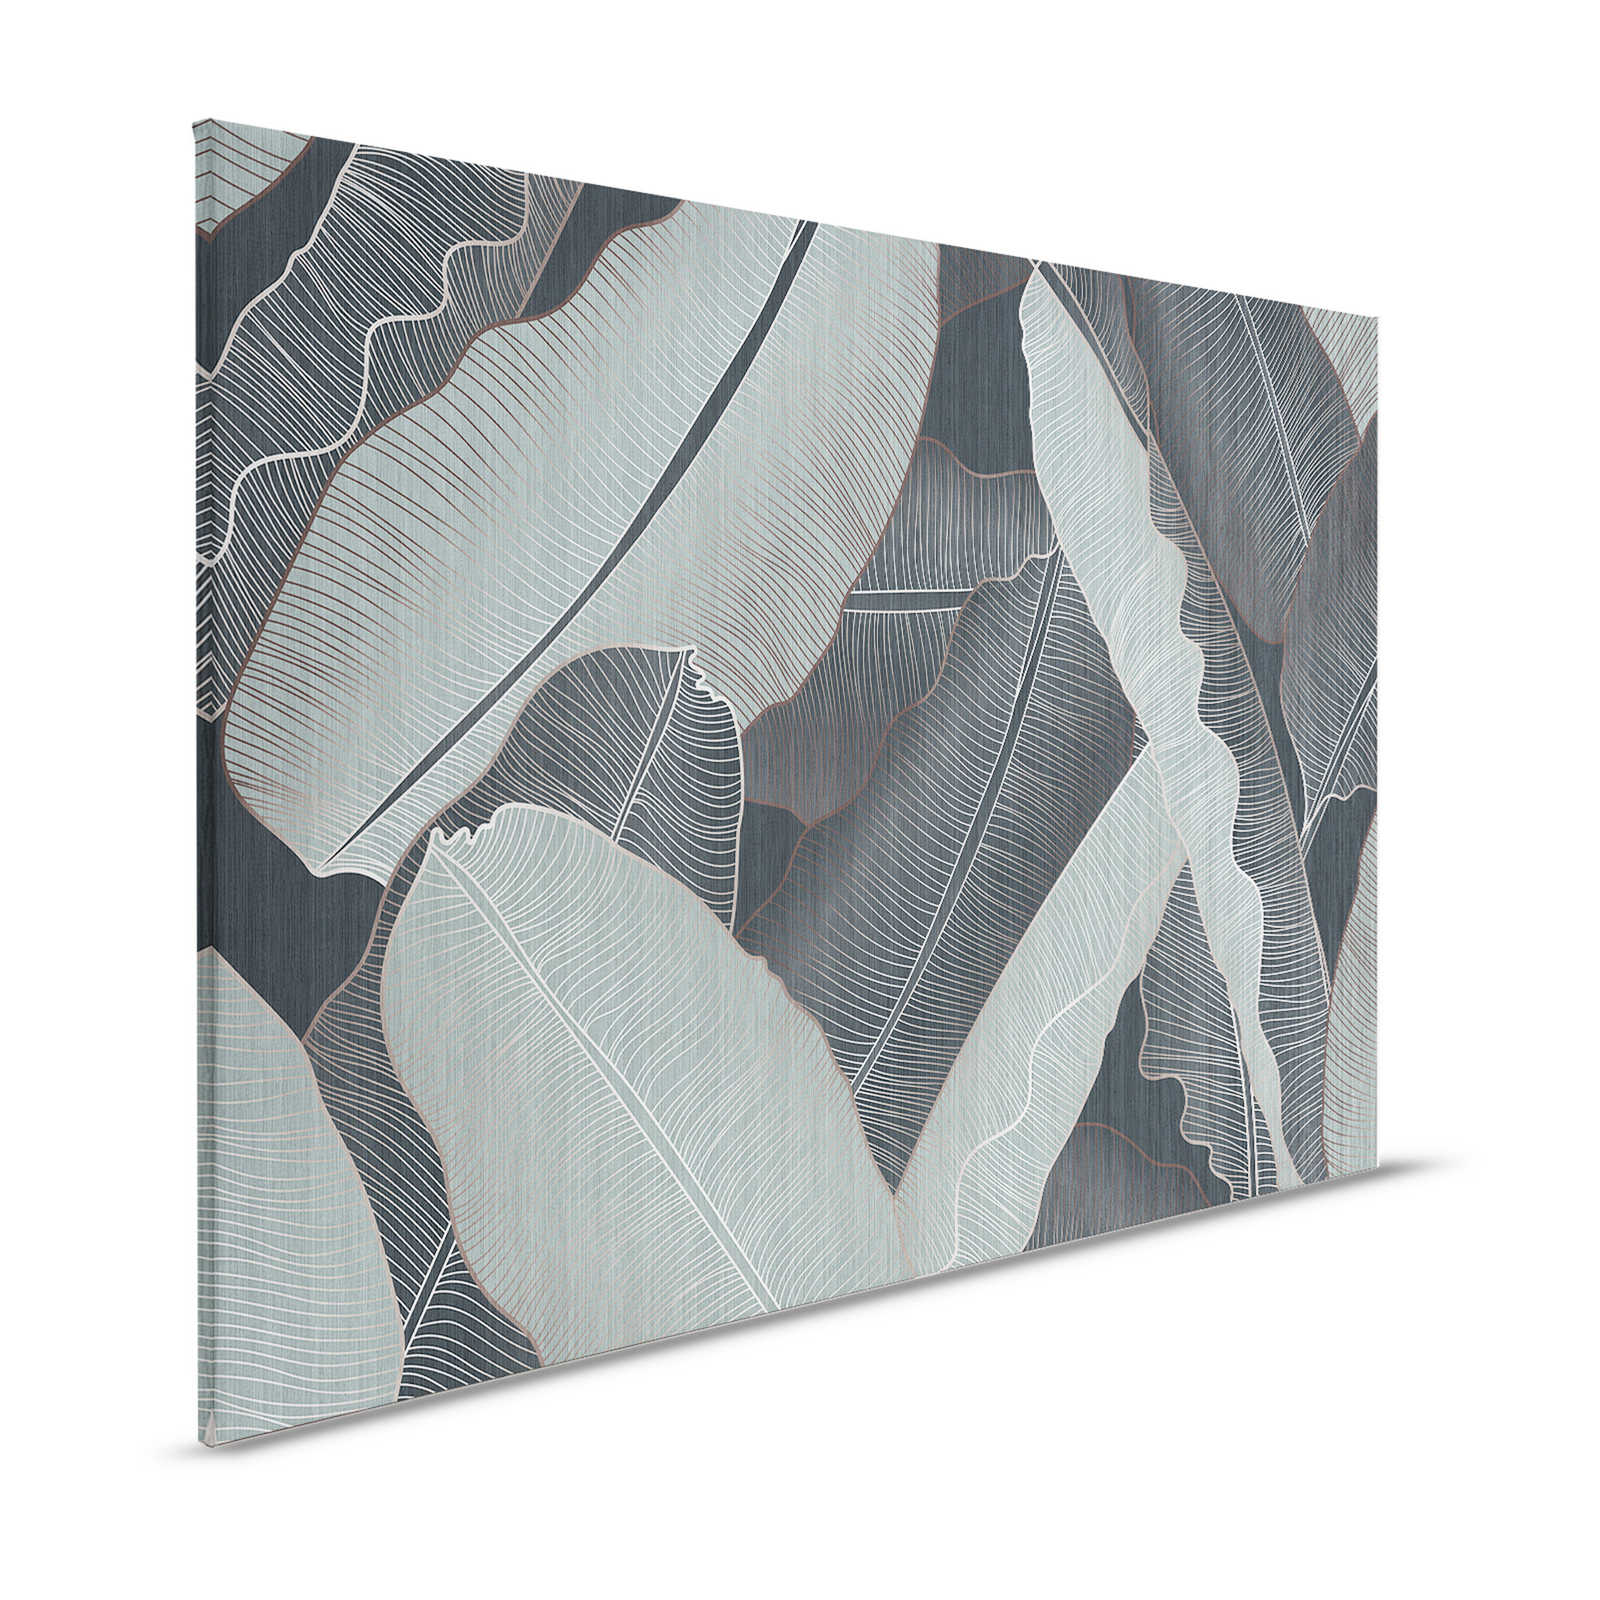 Under Cover 1 - Palm Leaf Canvas Painting Grey & Pale Green Drawing Style - 1.20 m x 0.80 m
